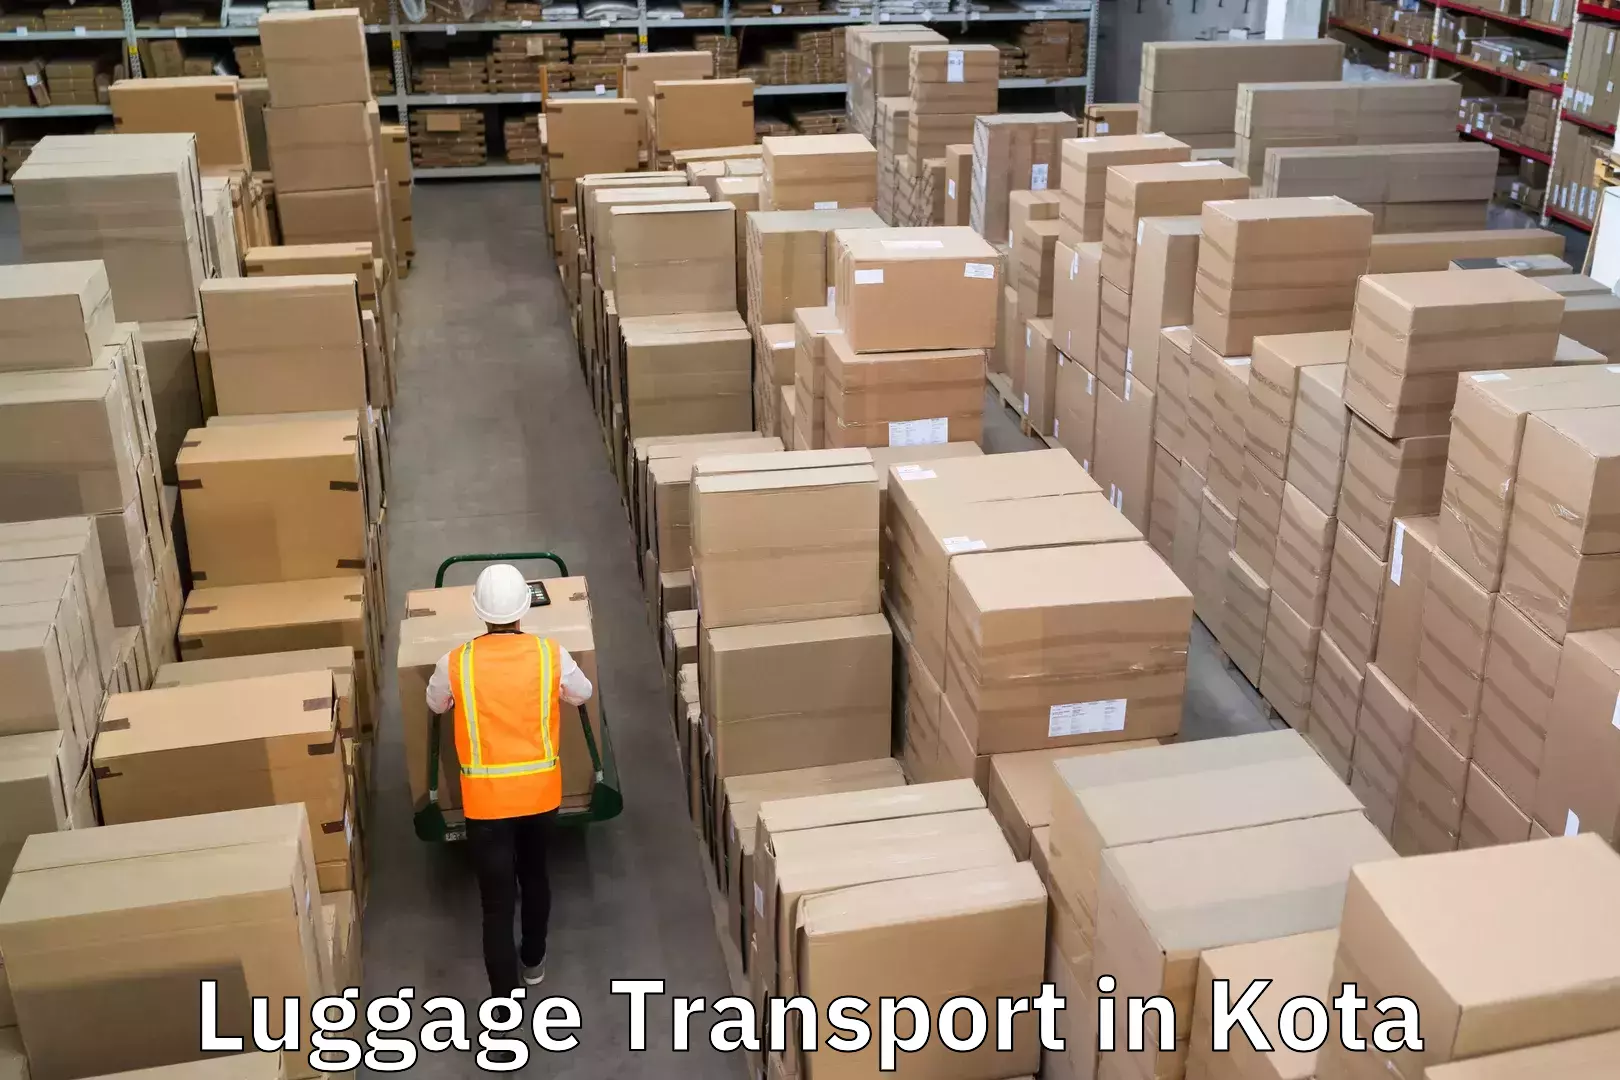 Luggage shipping trends in Kota